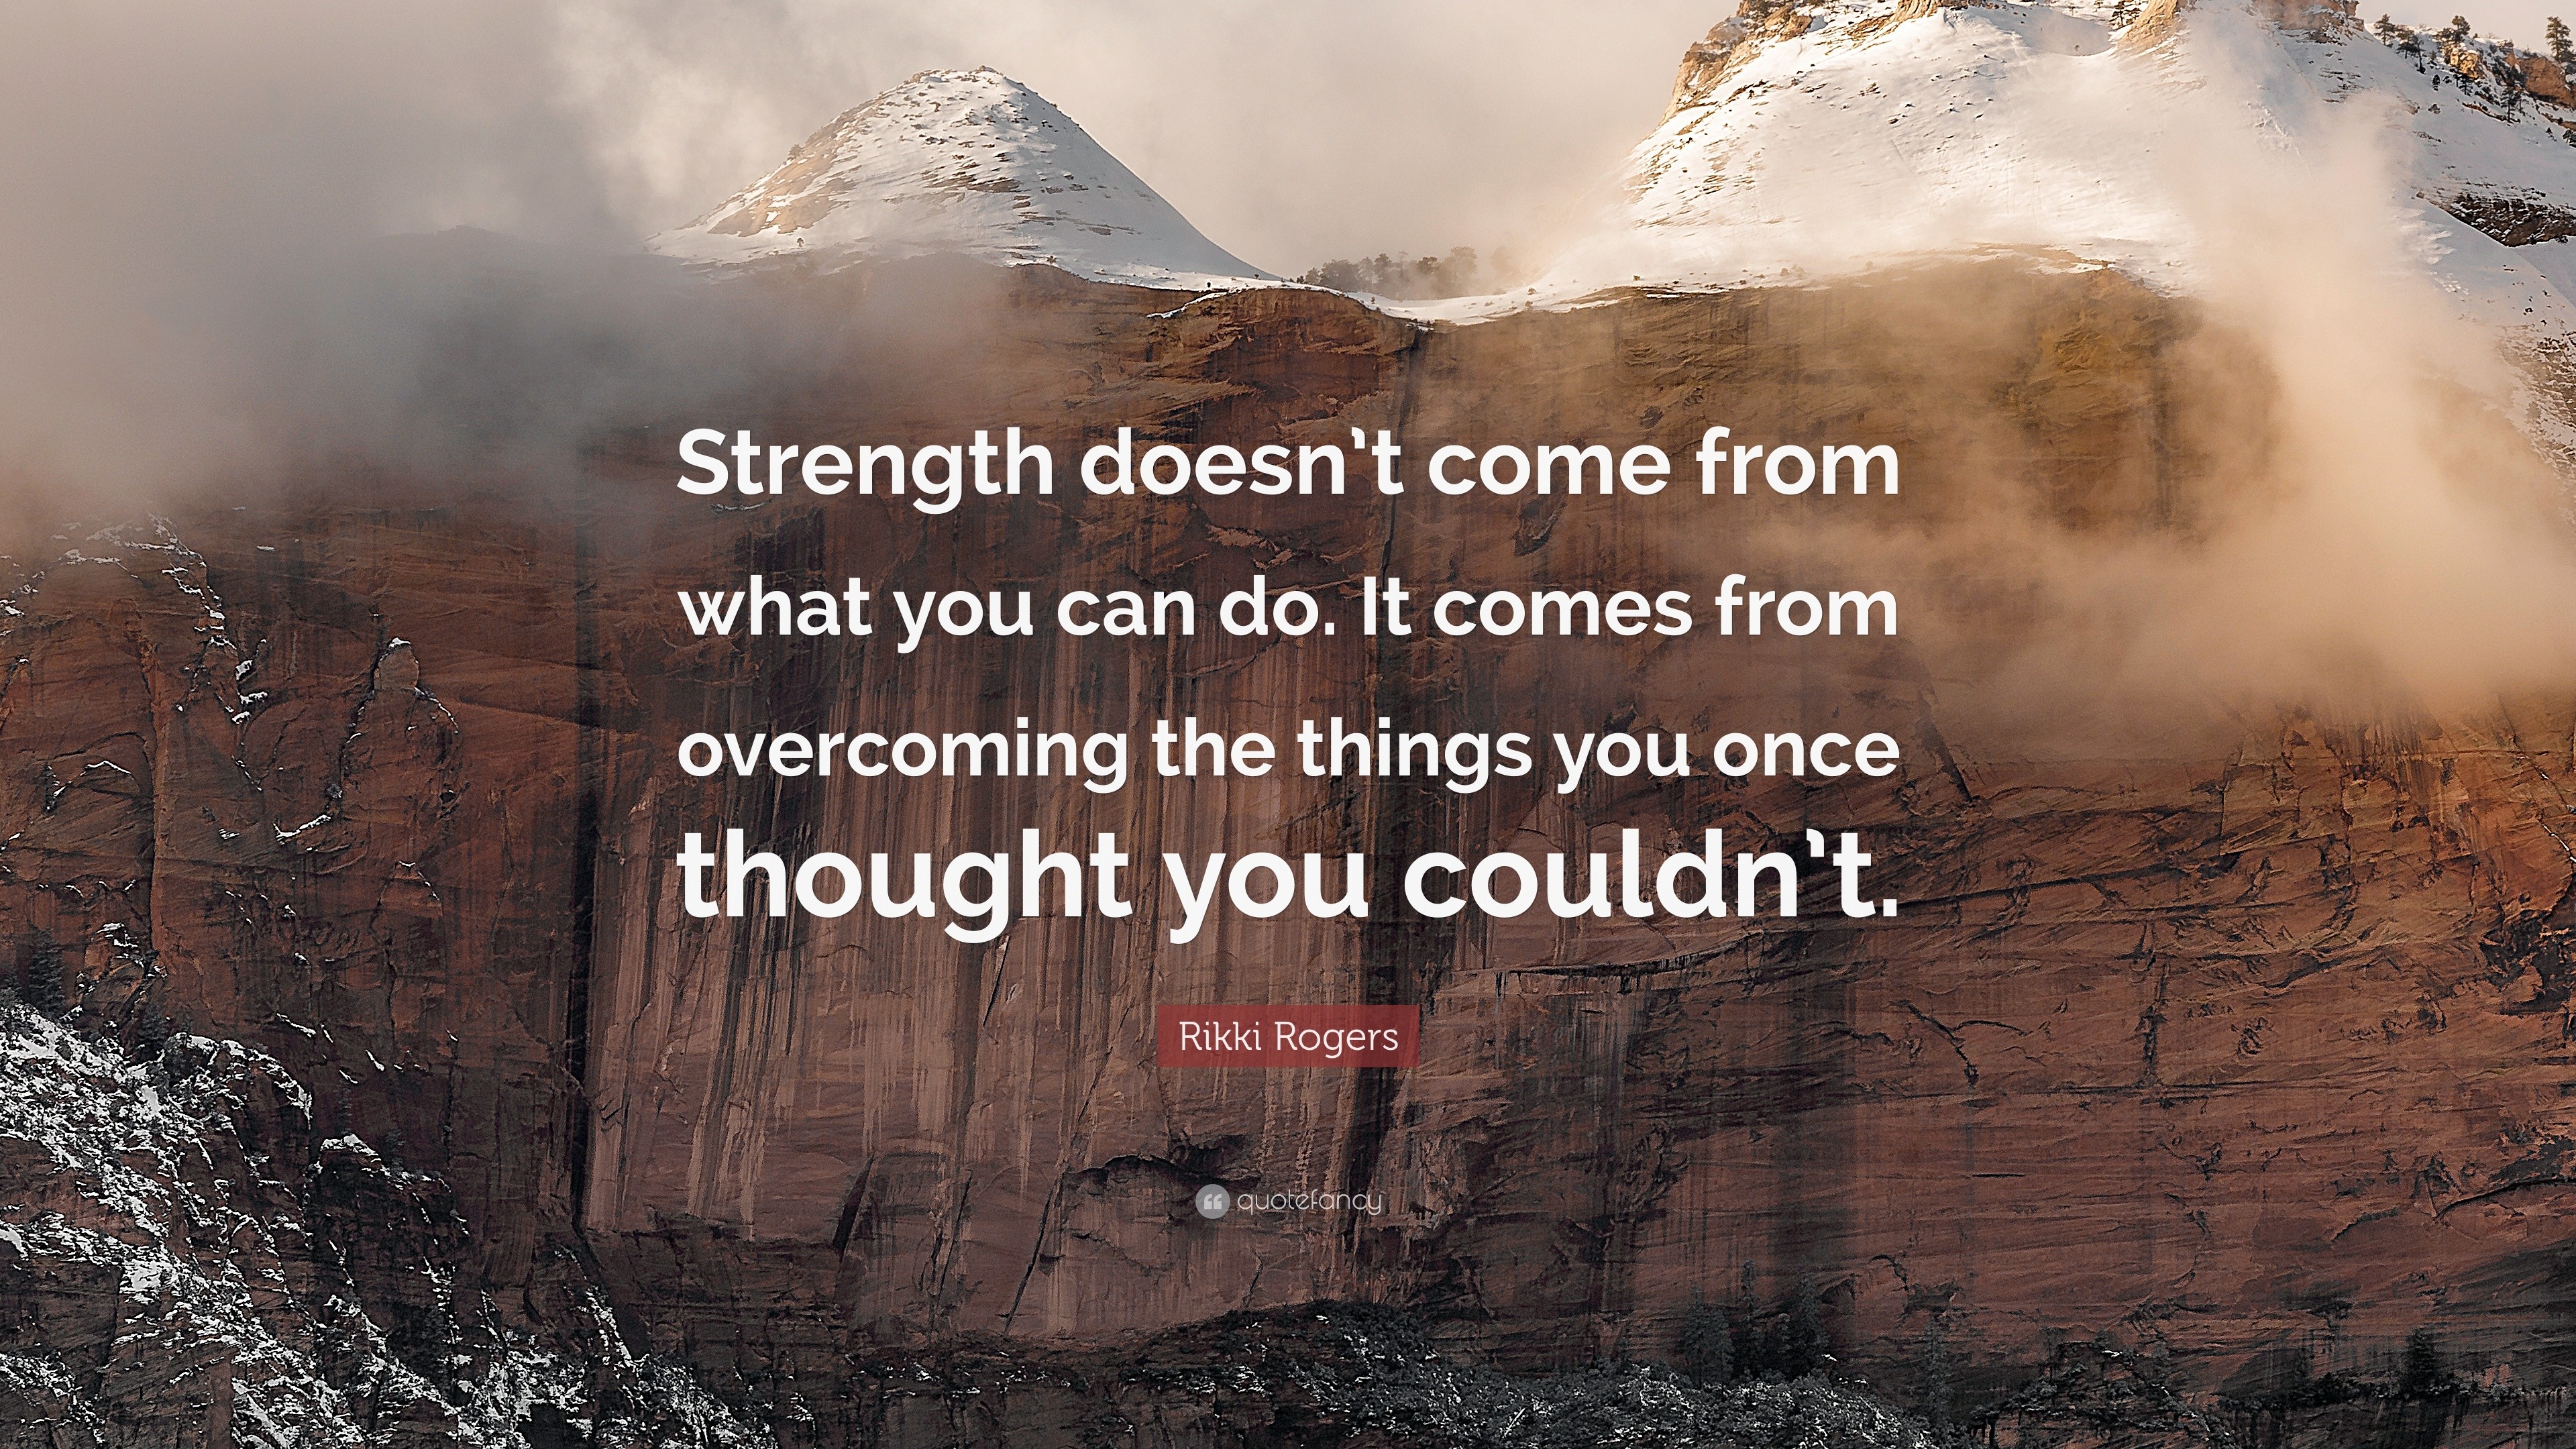 Rikki Rogers Quote: “Strength doesn’t come from what you can do. It